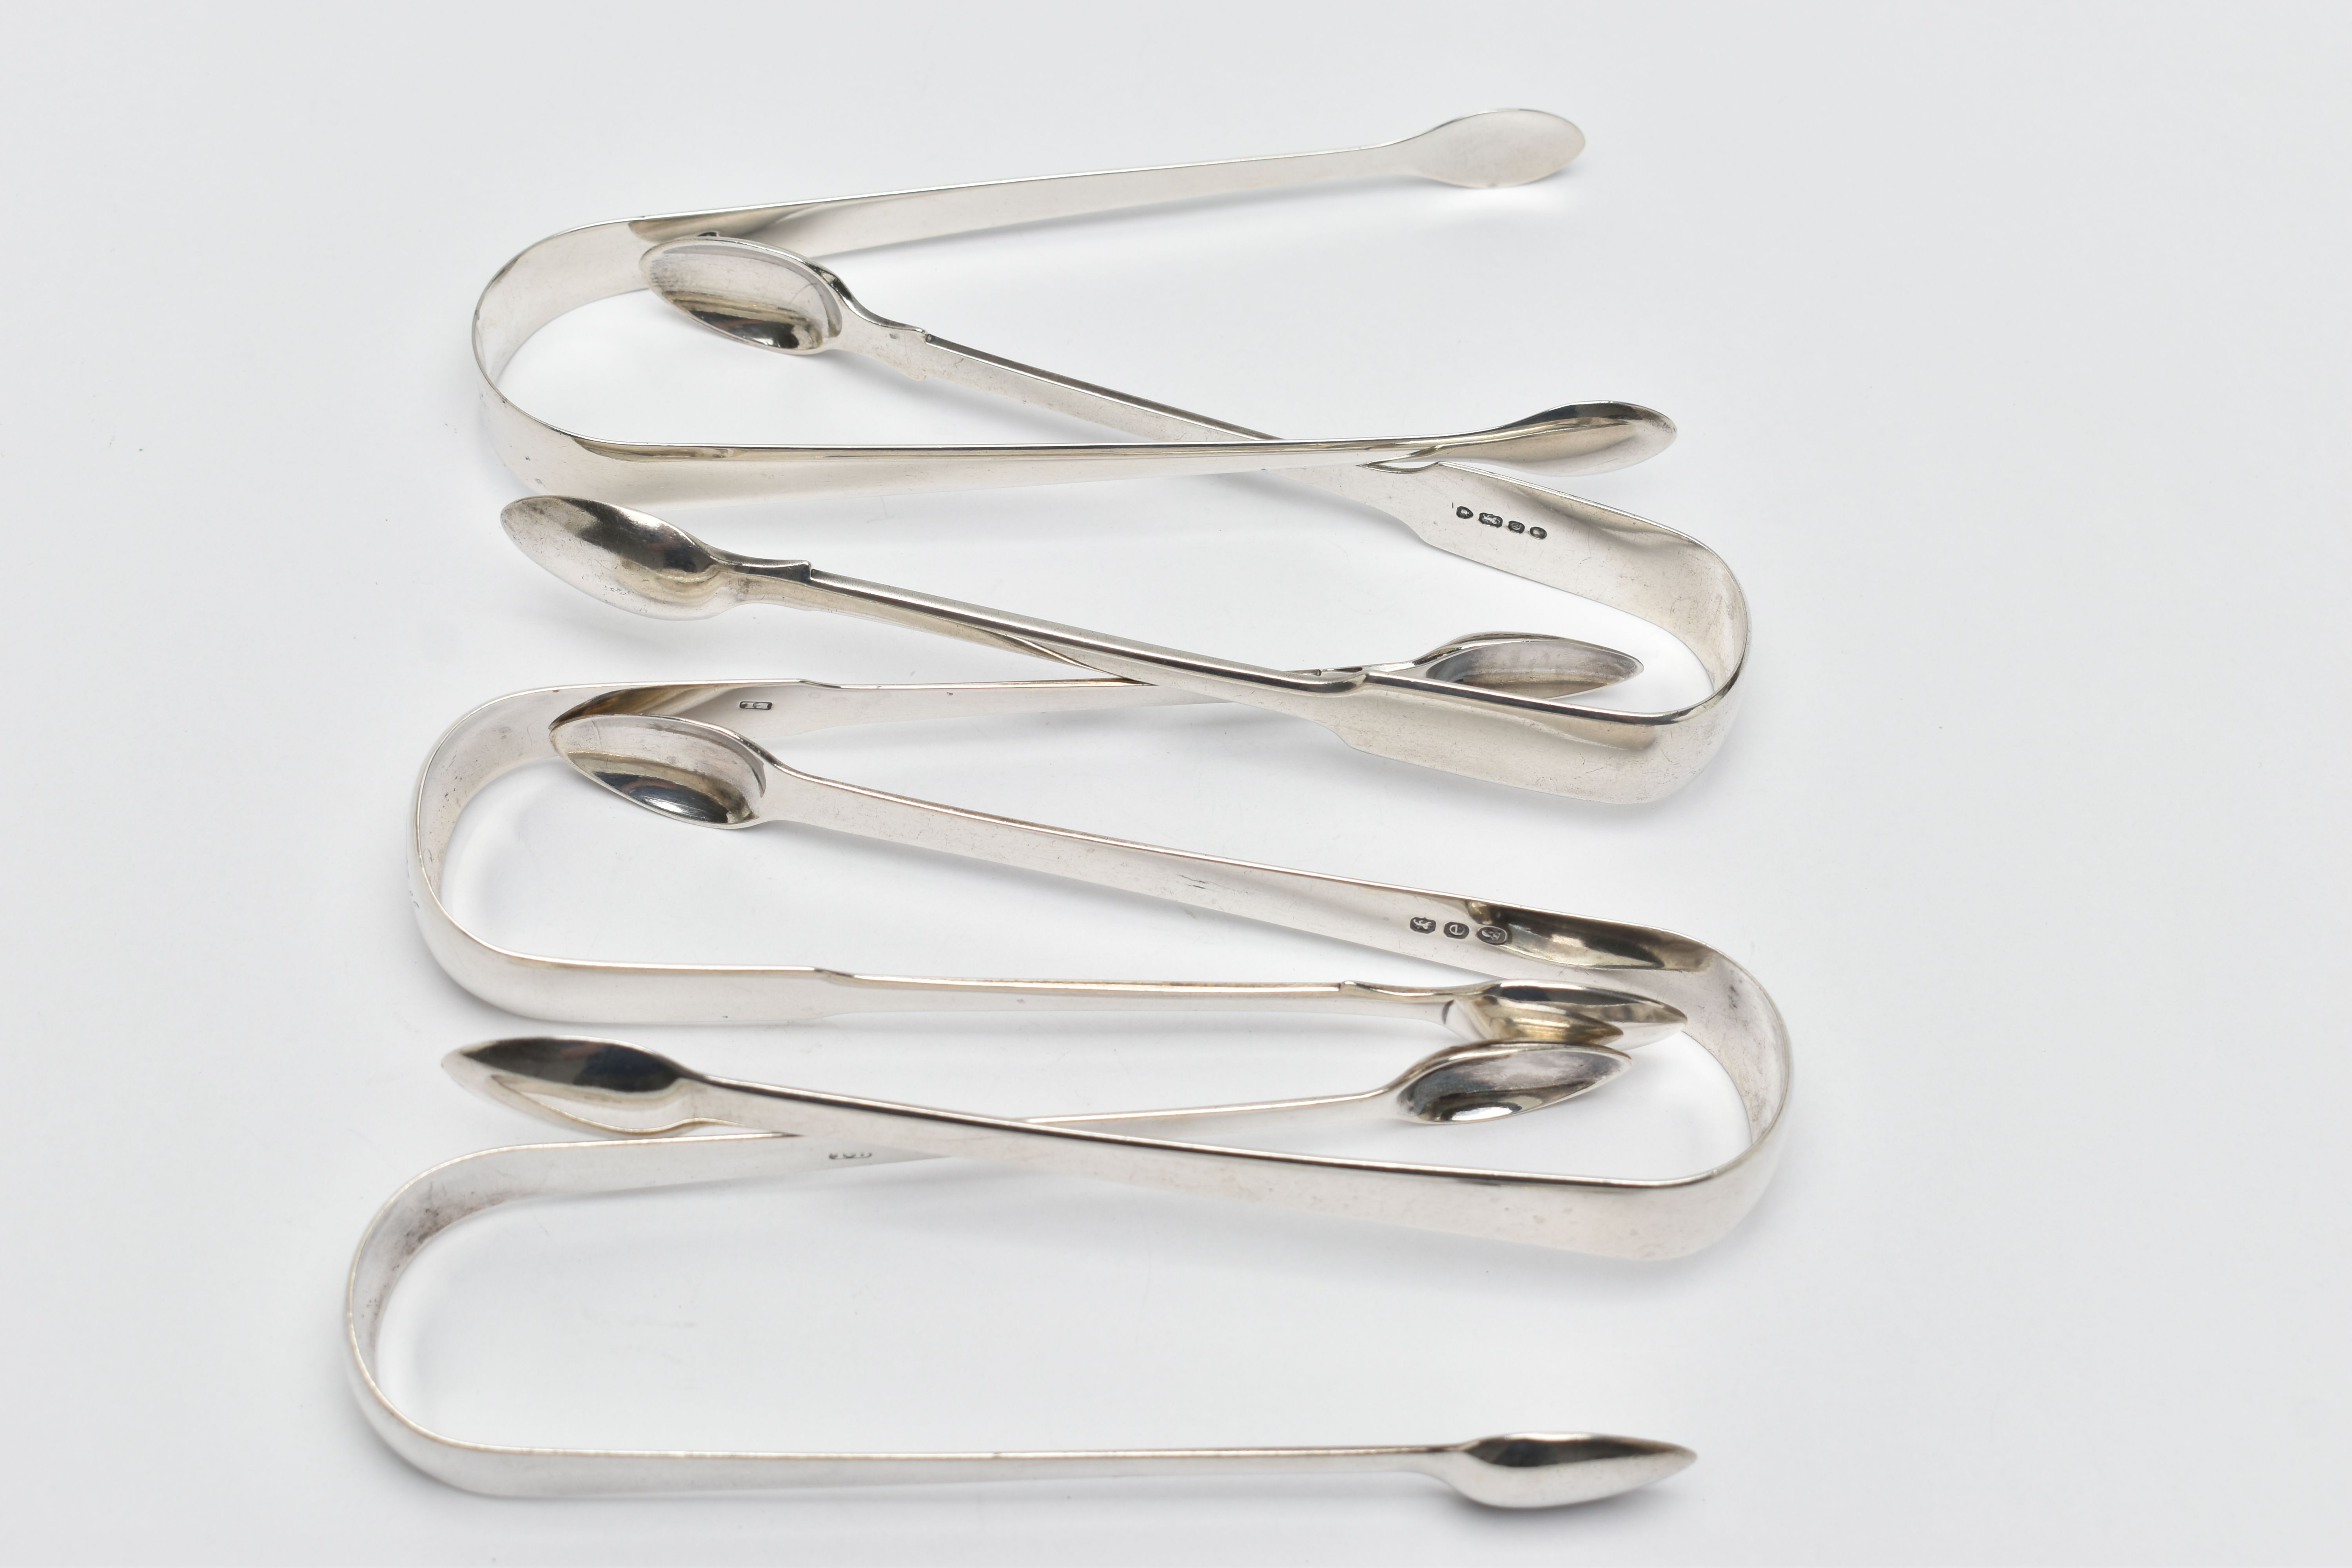 FIVE SILVER SUGAR TONGS, one fiddle pattern sugar tong, hallmarked 'Edward Lees' London 1807, one - Image 4 of 5